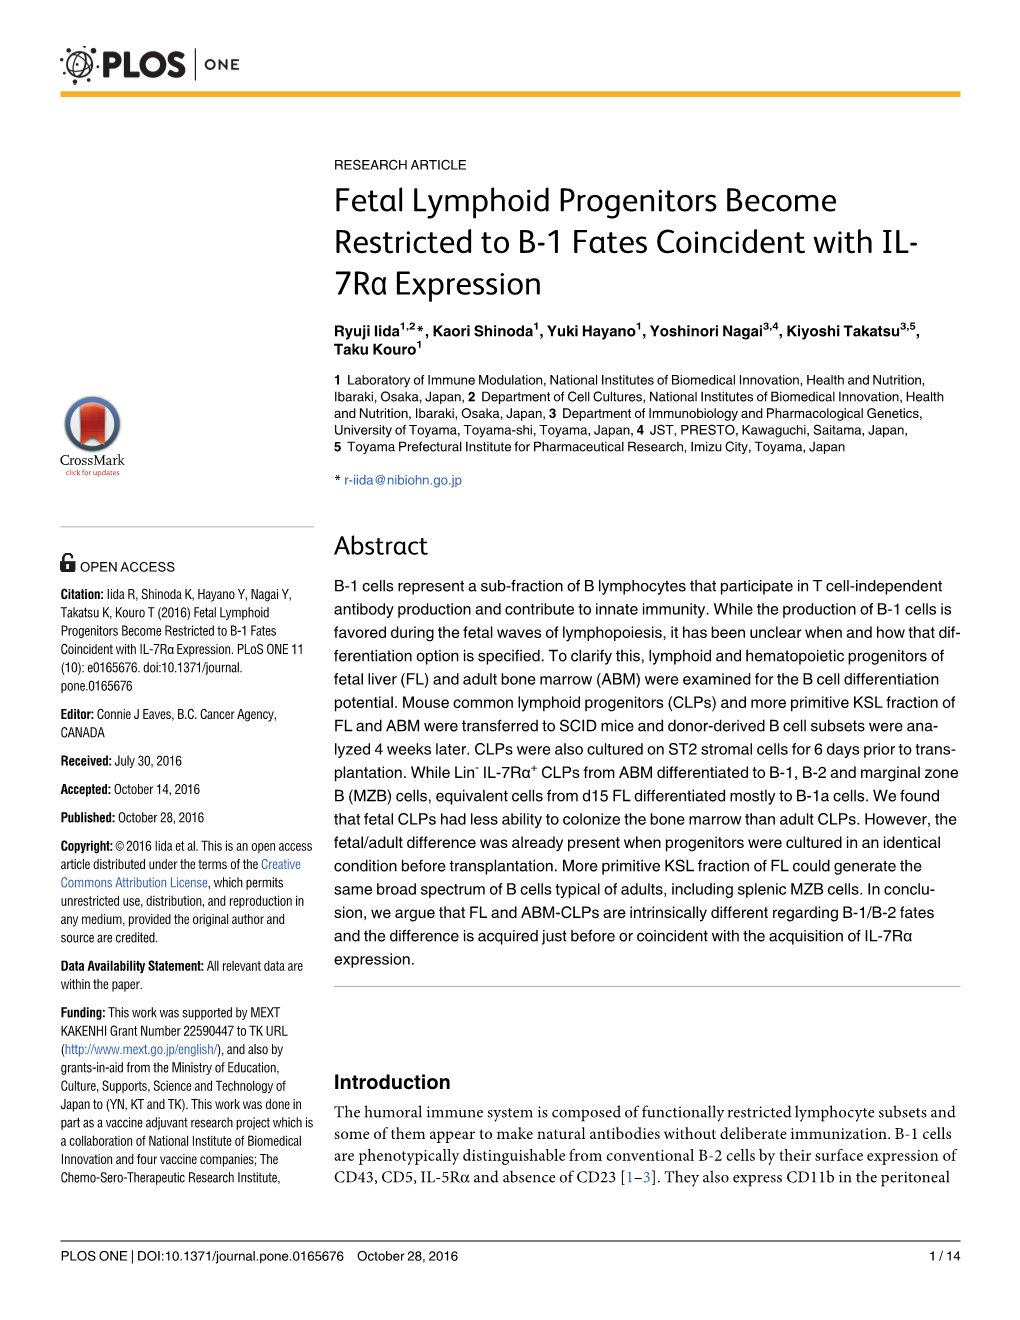 Fetal Lymphoid Progenitors Become Restricted to B-1 Fates Coincident with IL- 7Rα Expression